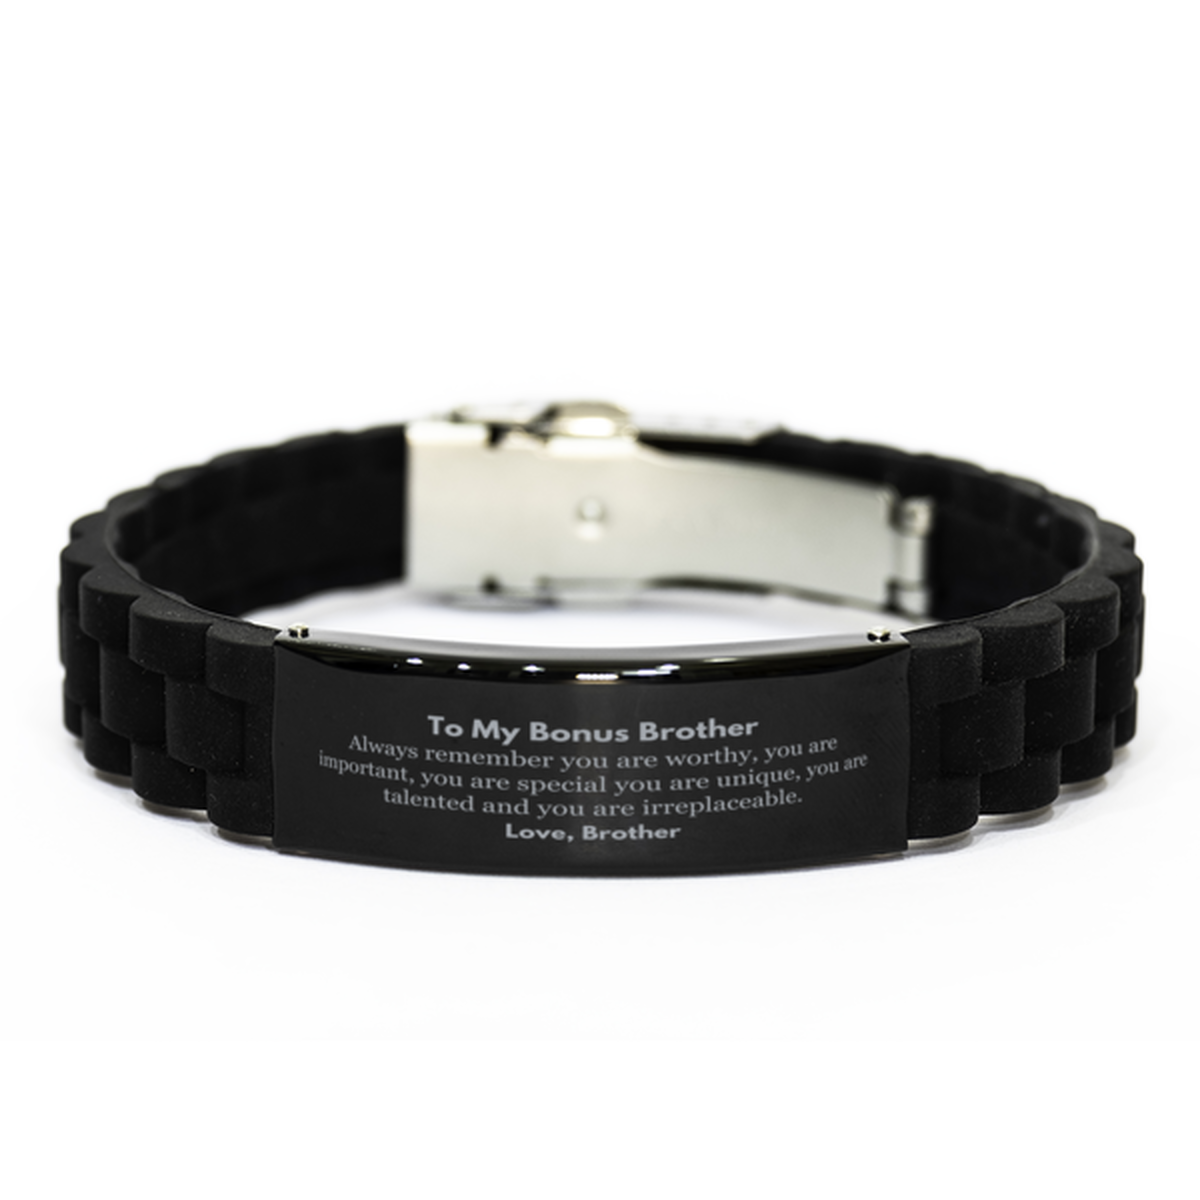 Bonus Brother Birthday Gifts from Brother, Inspirational Black Glidelock Clasp Bracelet for Bonus Brother Christmas Graduation Gifts for Bonus Brother Always remember you are worthy, you are important. Love, Brother